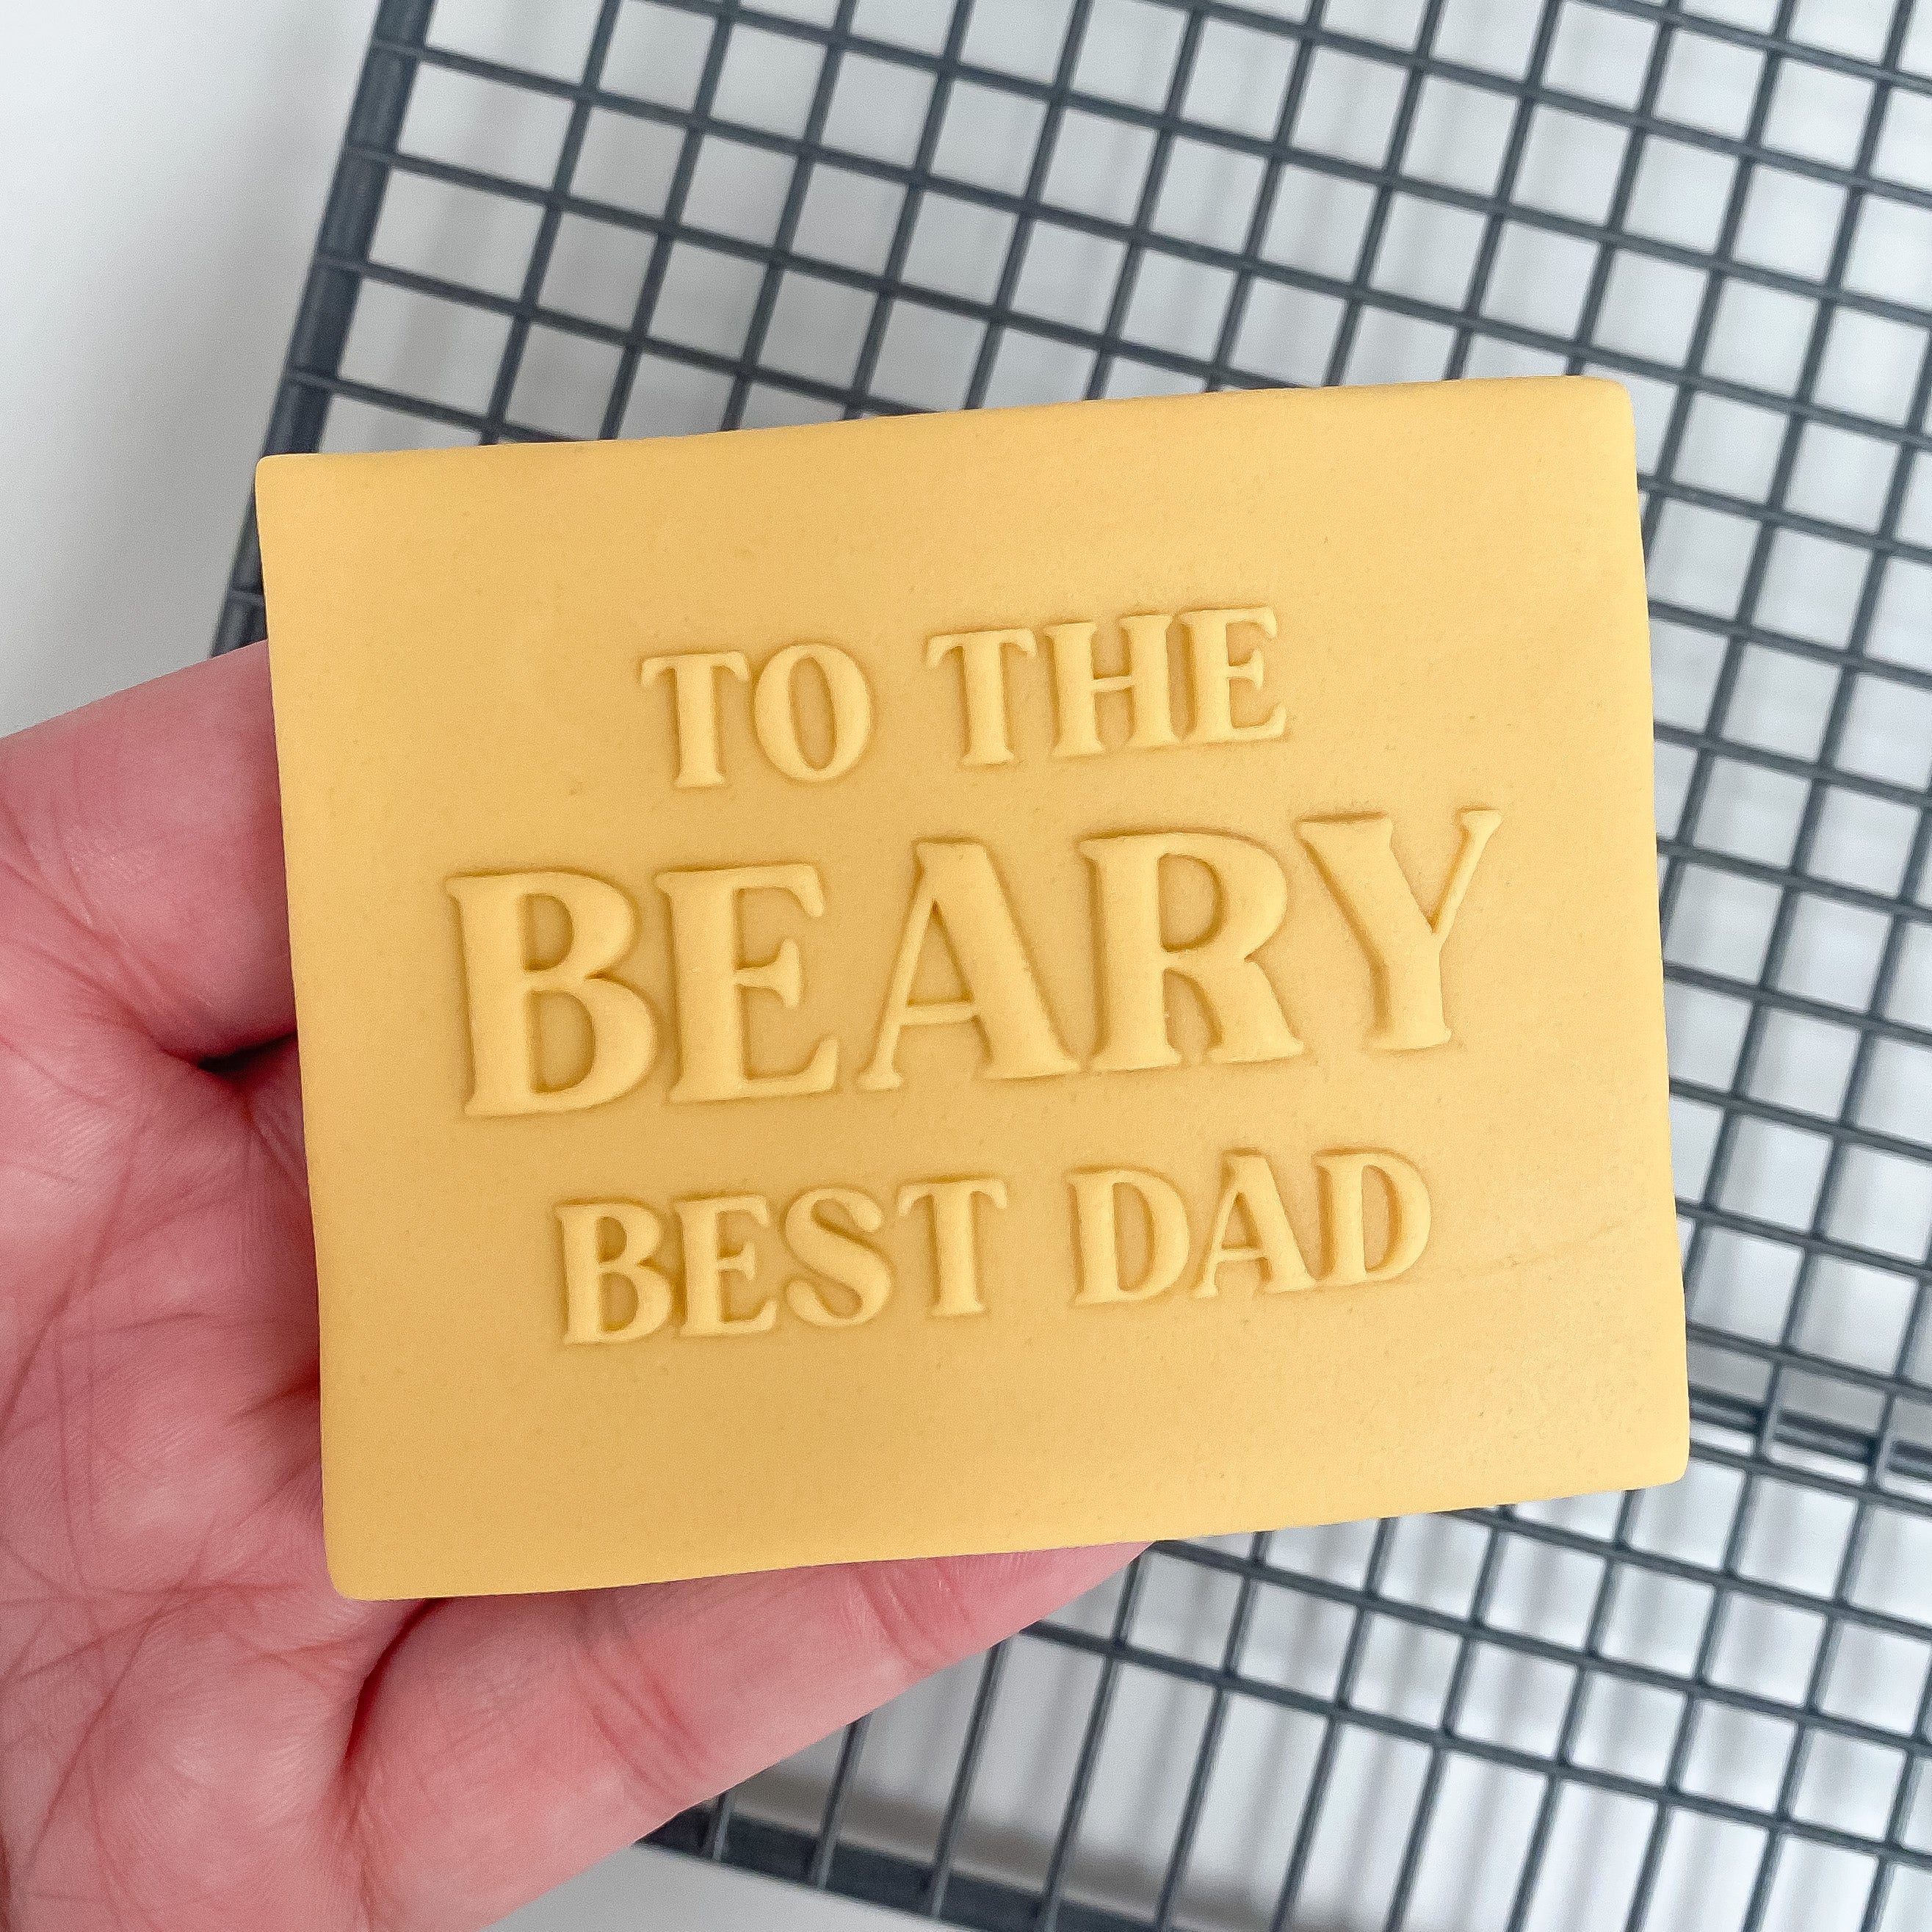 To The Beary Best Dad - Reverse Stamp